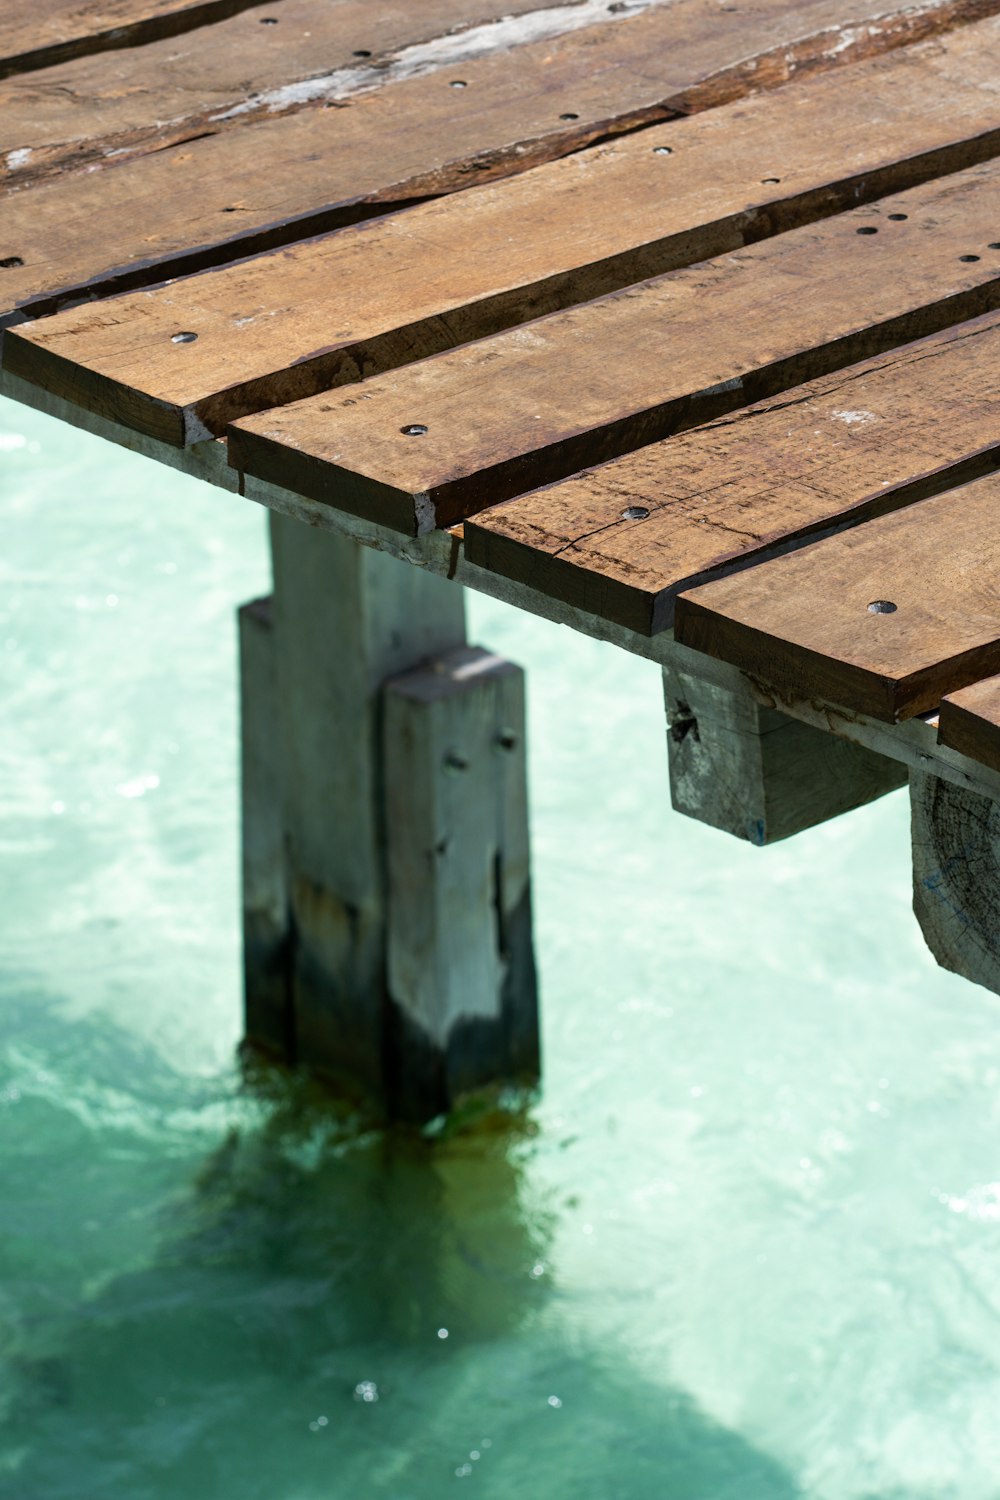 a close up of a wooden dock in the water